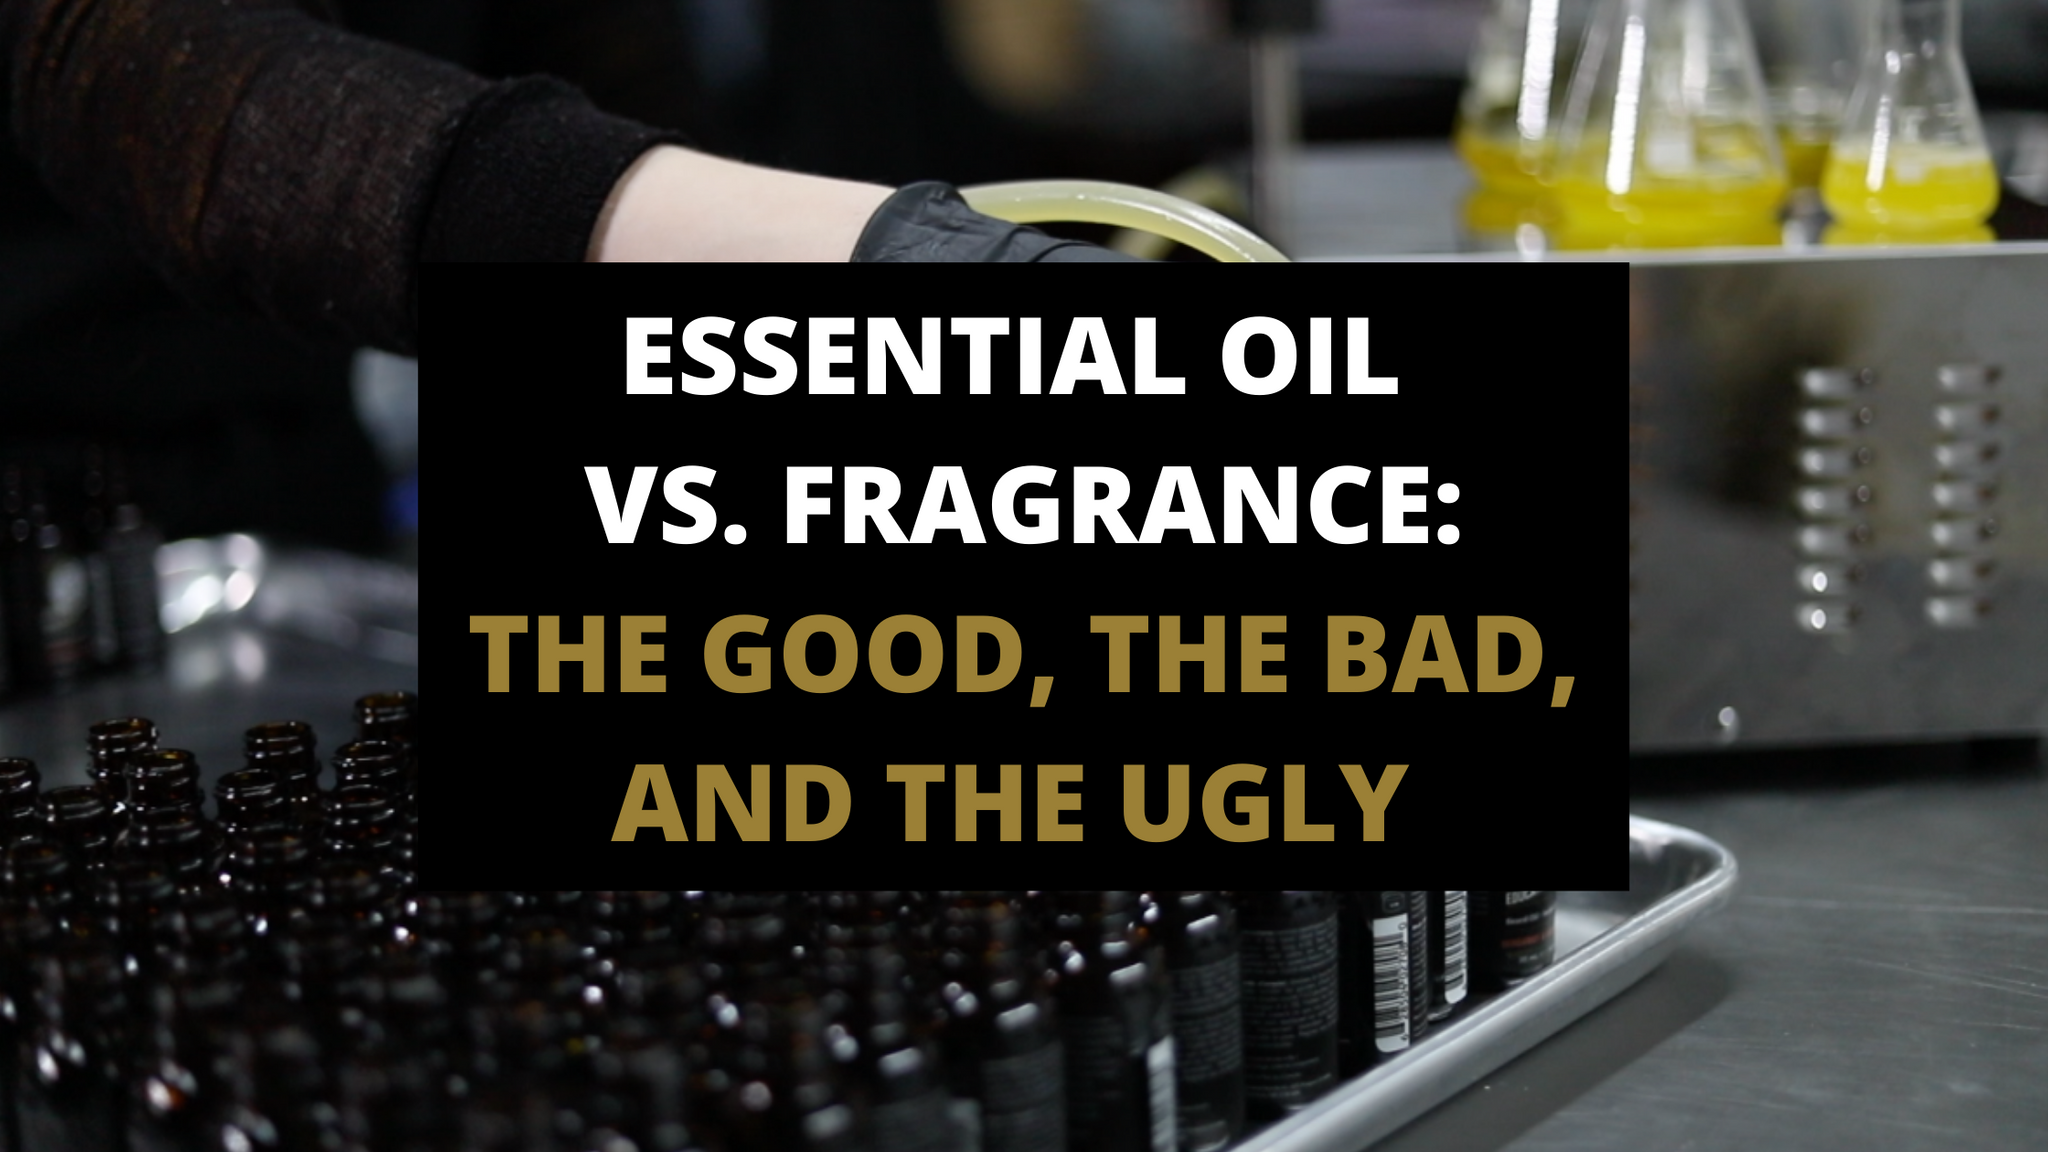 ESSENTIAL OIL VS. FRAGRANCE: THE GOOD, THE BAD, AND THE UGLY